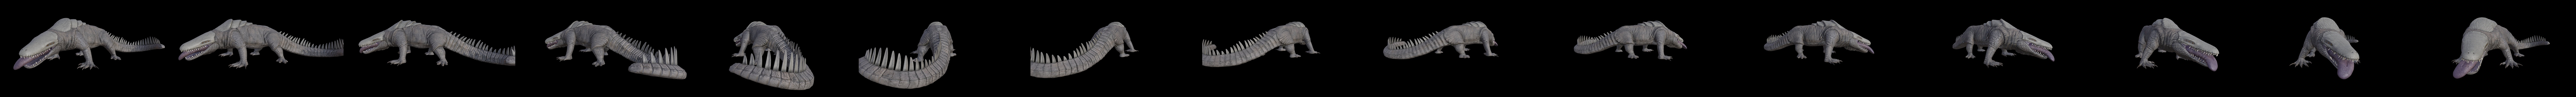 SCP-682 Model from Six Eight Two Demo - 3D model by Choczy (@choczy)  [ec7d0dc]